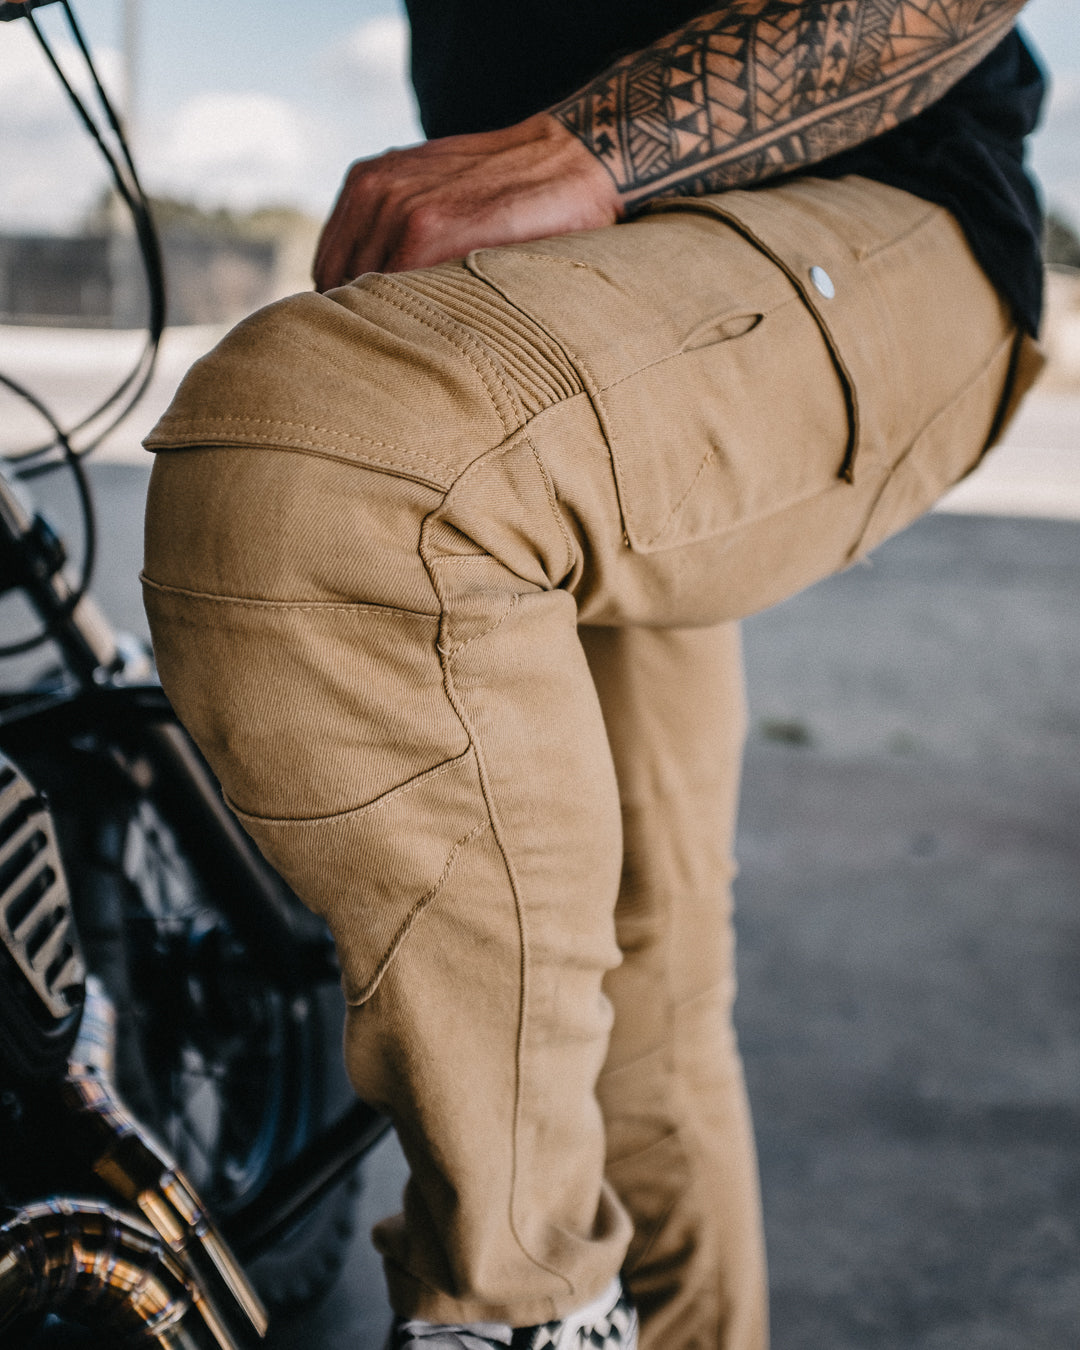 NBT Clothing has everything you will need to add to your closet as you create your motorwear wardrobe- stylish yet protective pants with free CE approved knee and hip armor, armored hoodies, armored flannels, belts, beanies and socks.  